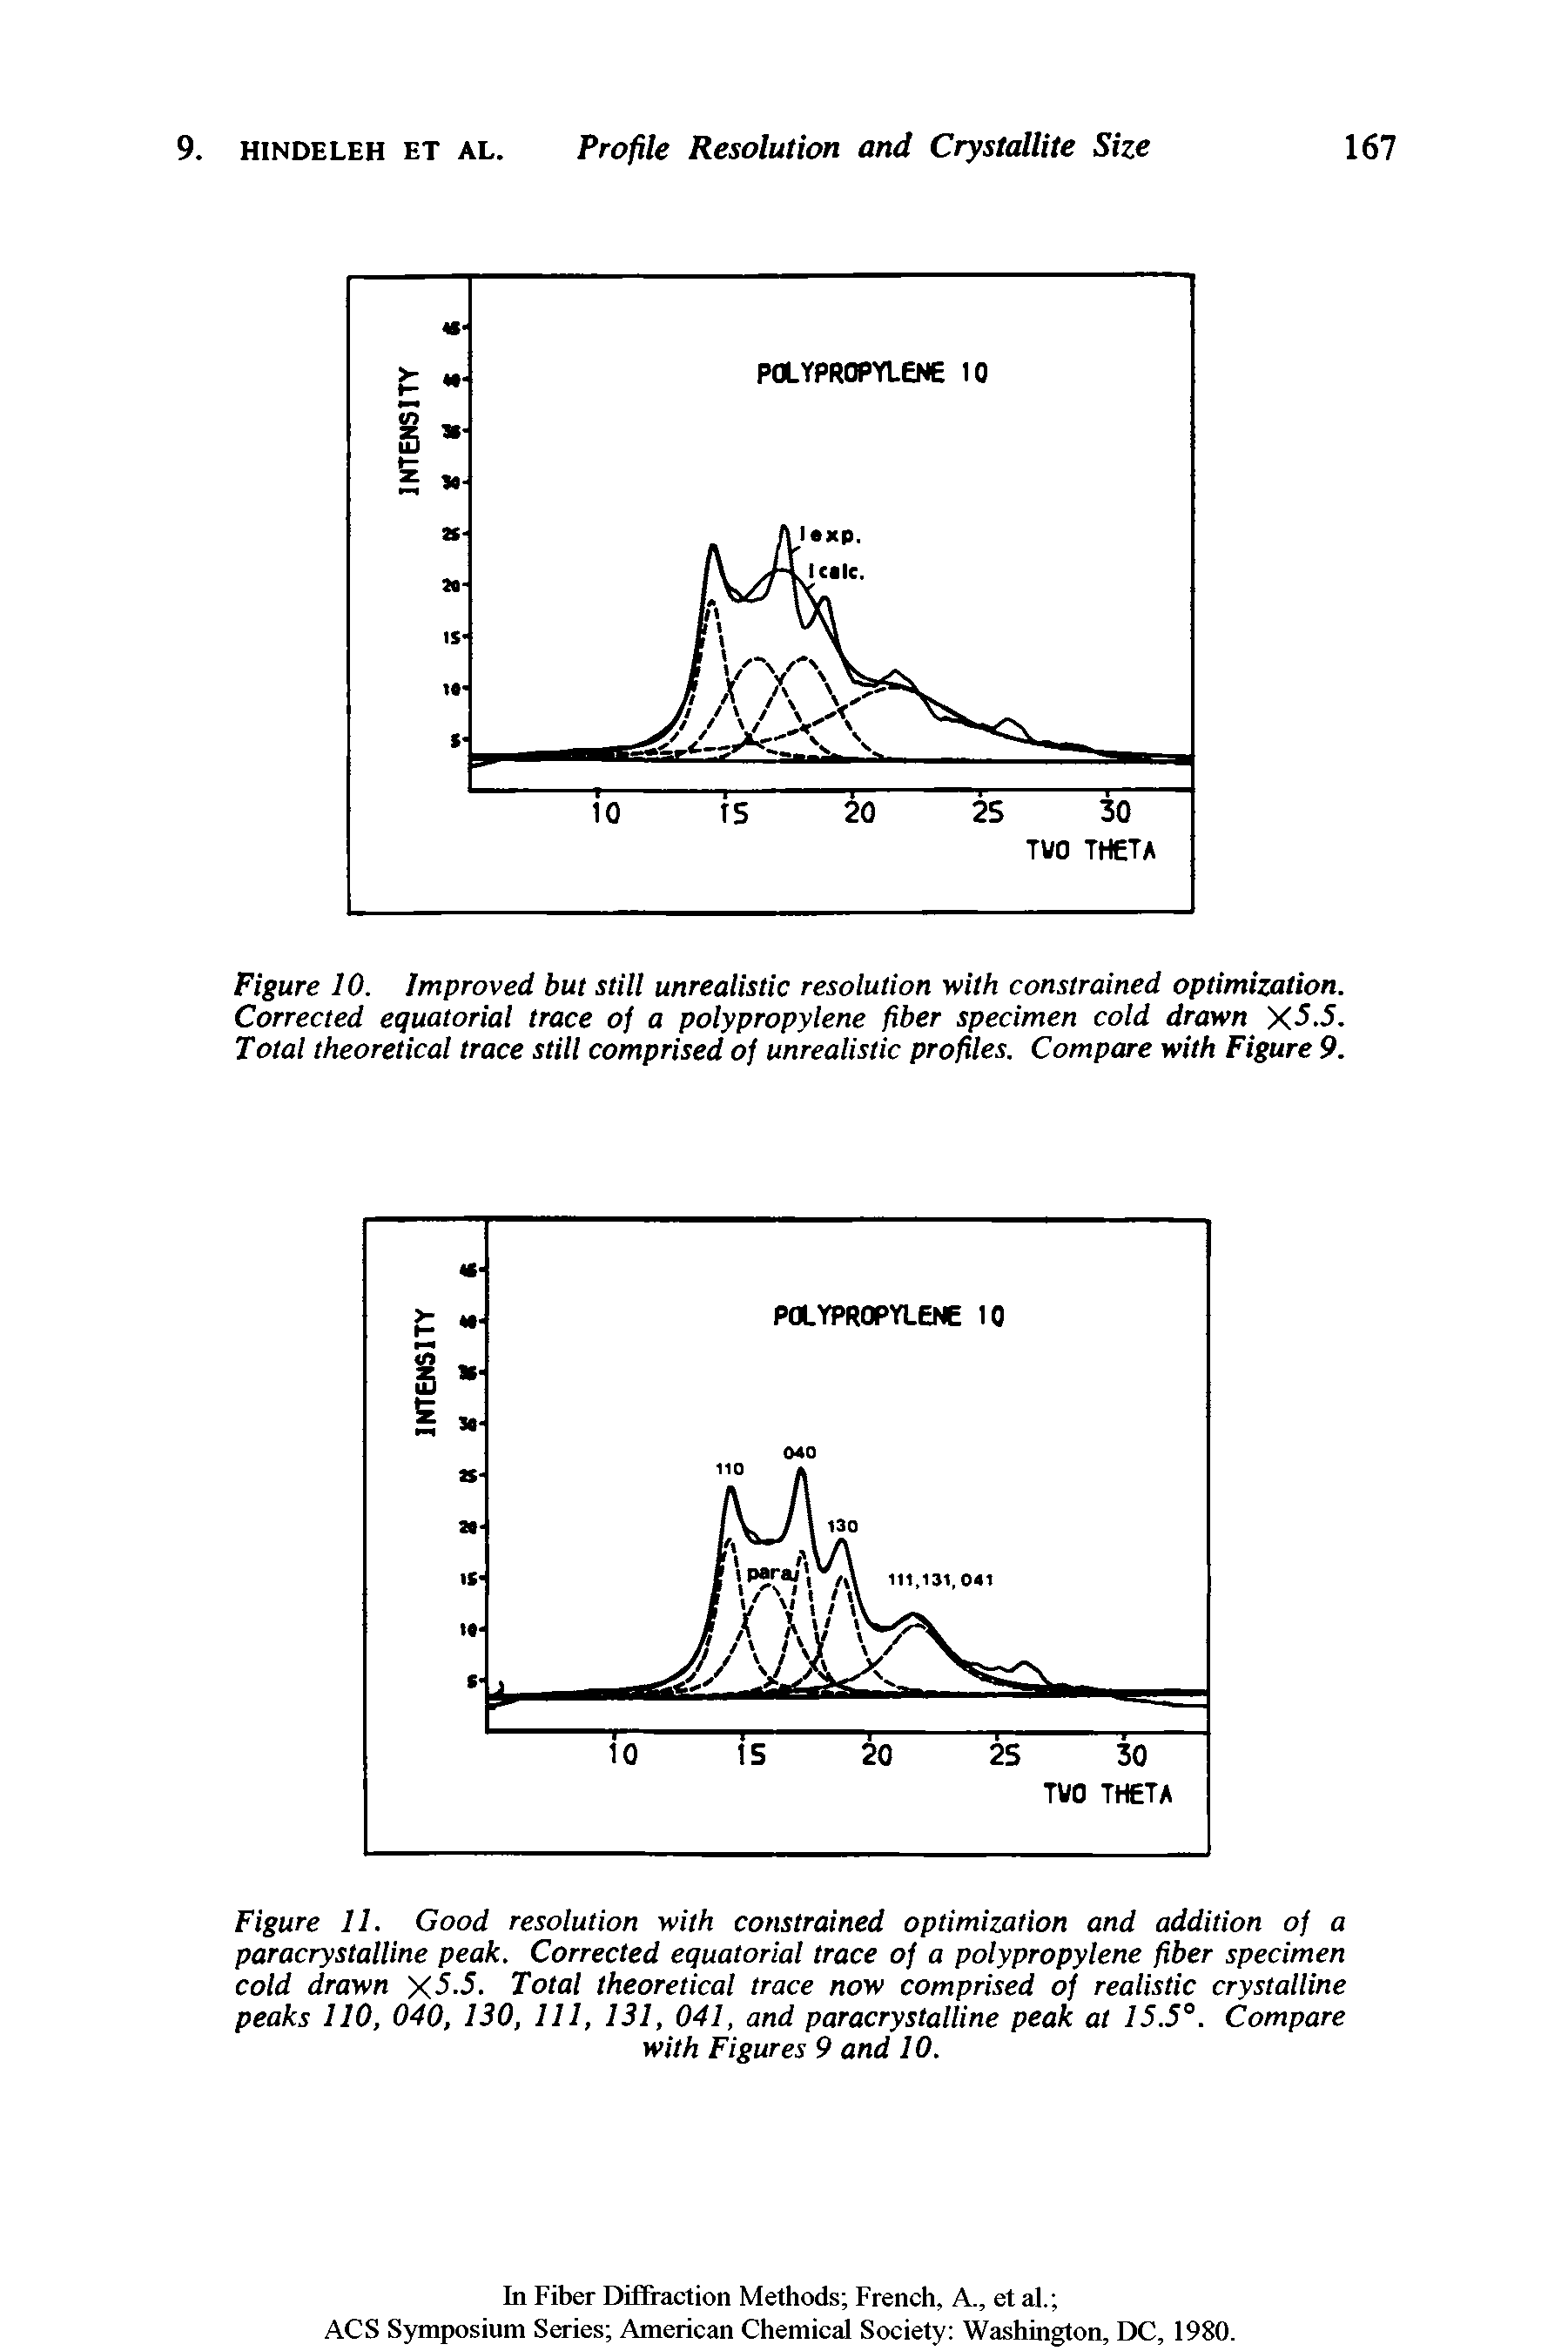 Figure 11. Good resolution with constrained optimization and addition of a paracrystalline peak. Corrected equatorial trace of a polypropylene fiber specimen cold drawn X-5.5. Total theoretical trace now comprised of realistic crystalline peaks 110, 040, 130, 111, 131, 041, and paracrystalline peak at 15.5°. Compare...